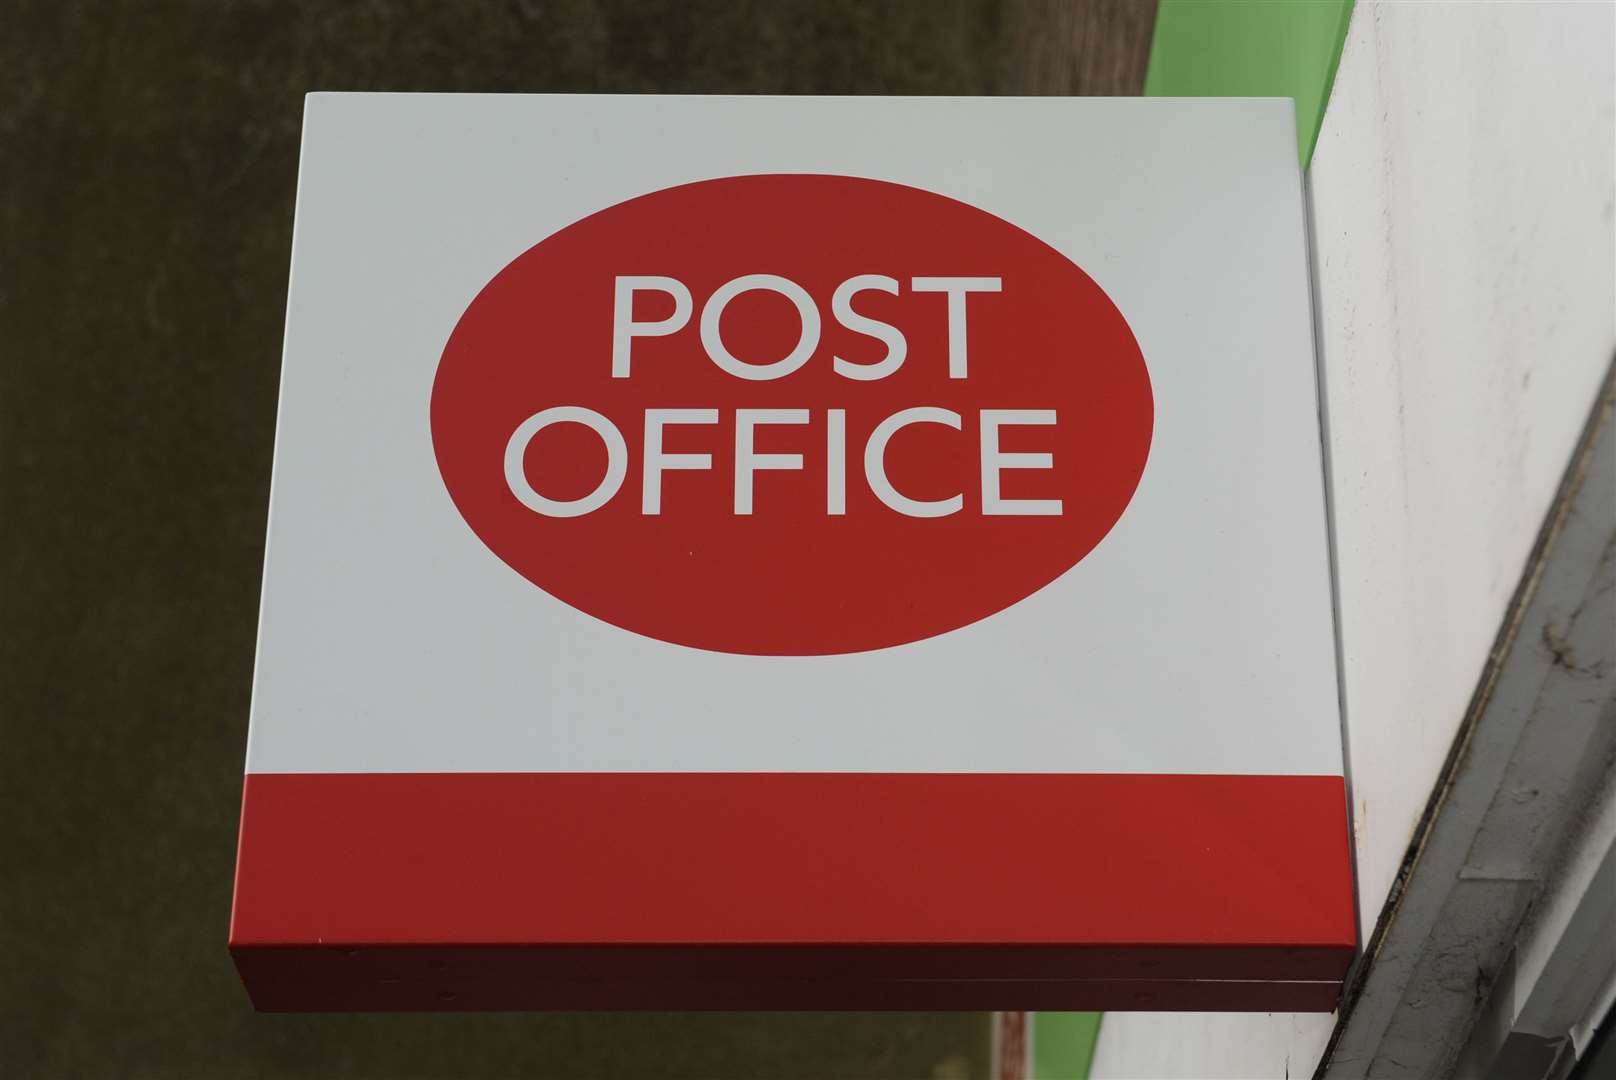 The Post Office network is subsidised by Government. Picture: Tony Flashman